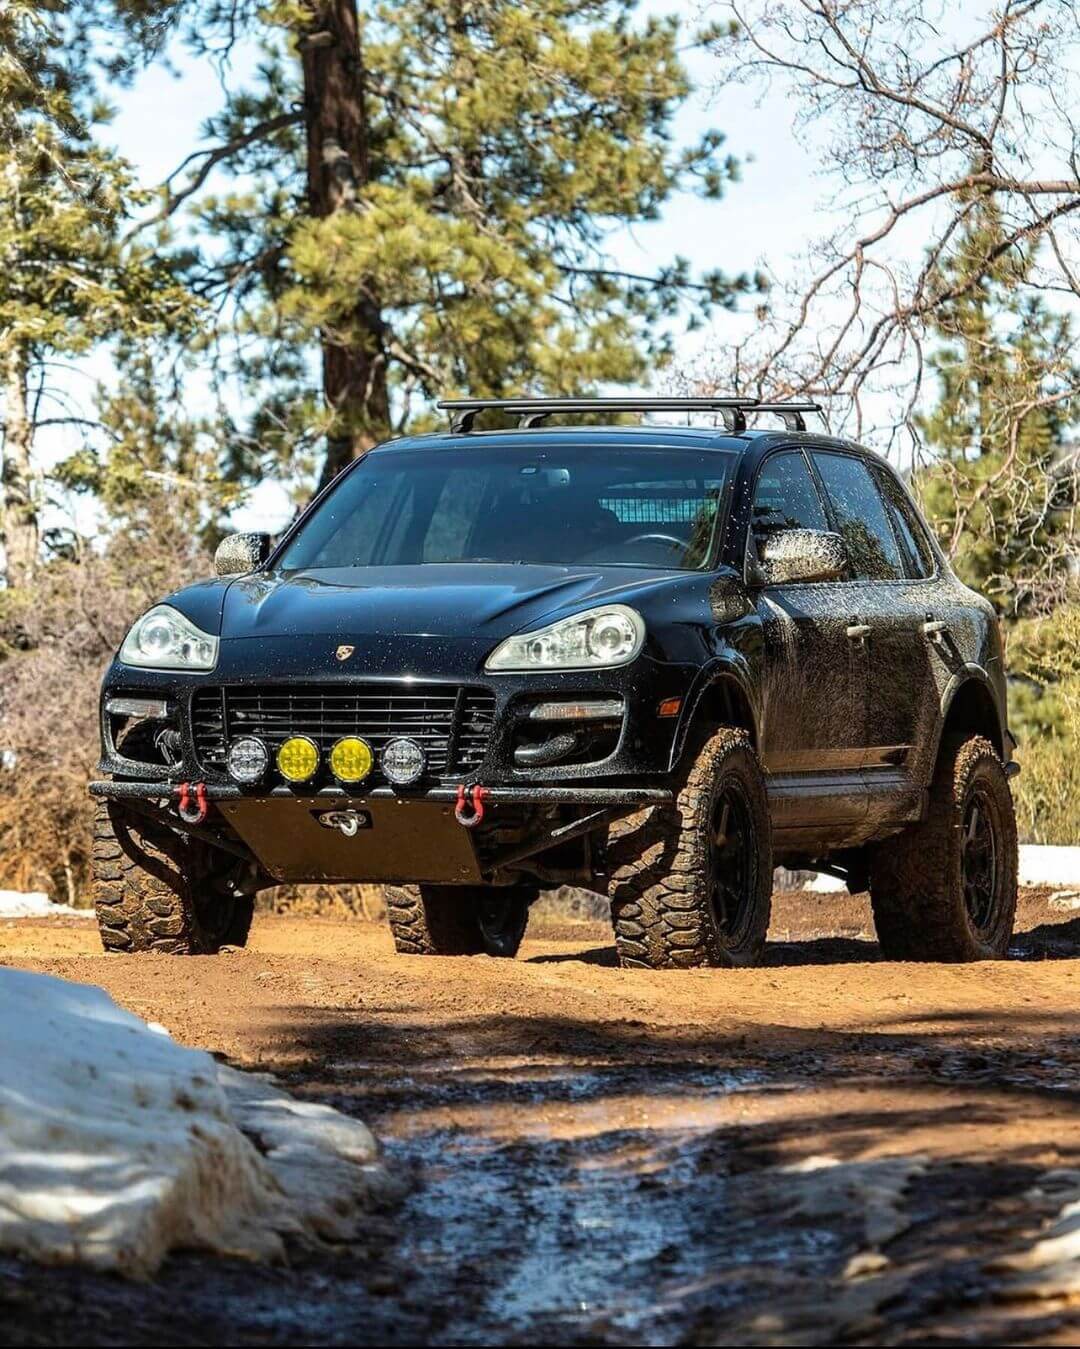 Lifted Porsche Cayenne on 35 inch tires